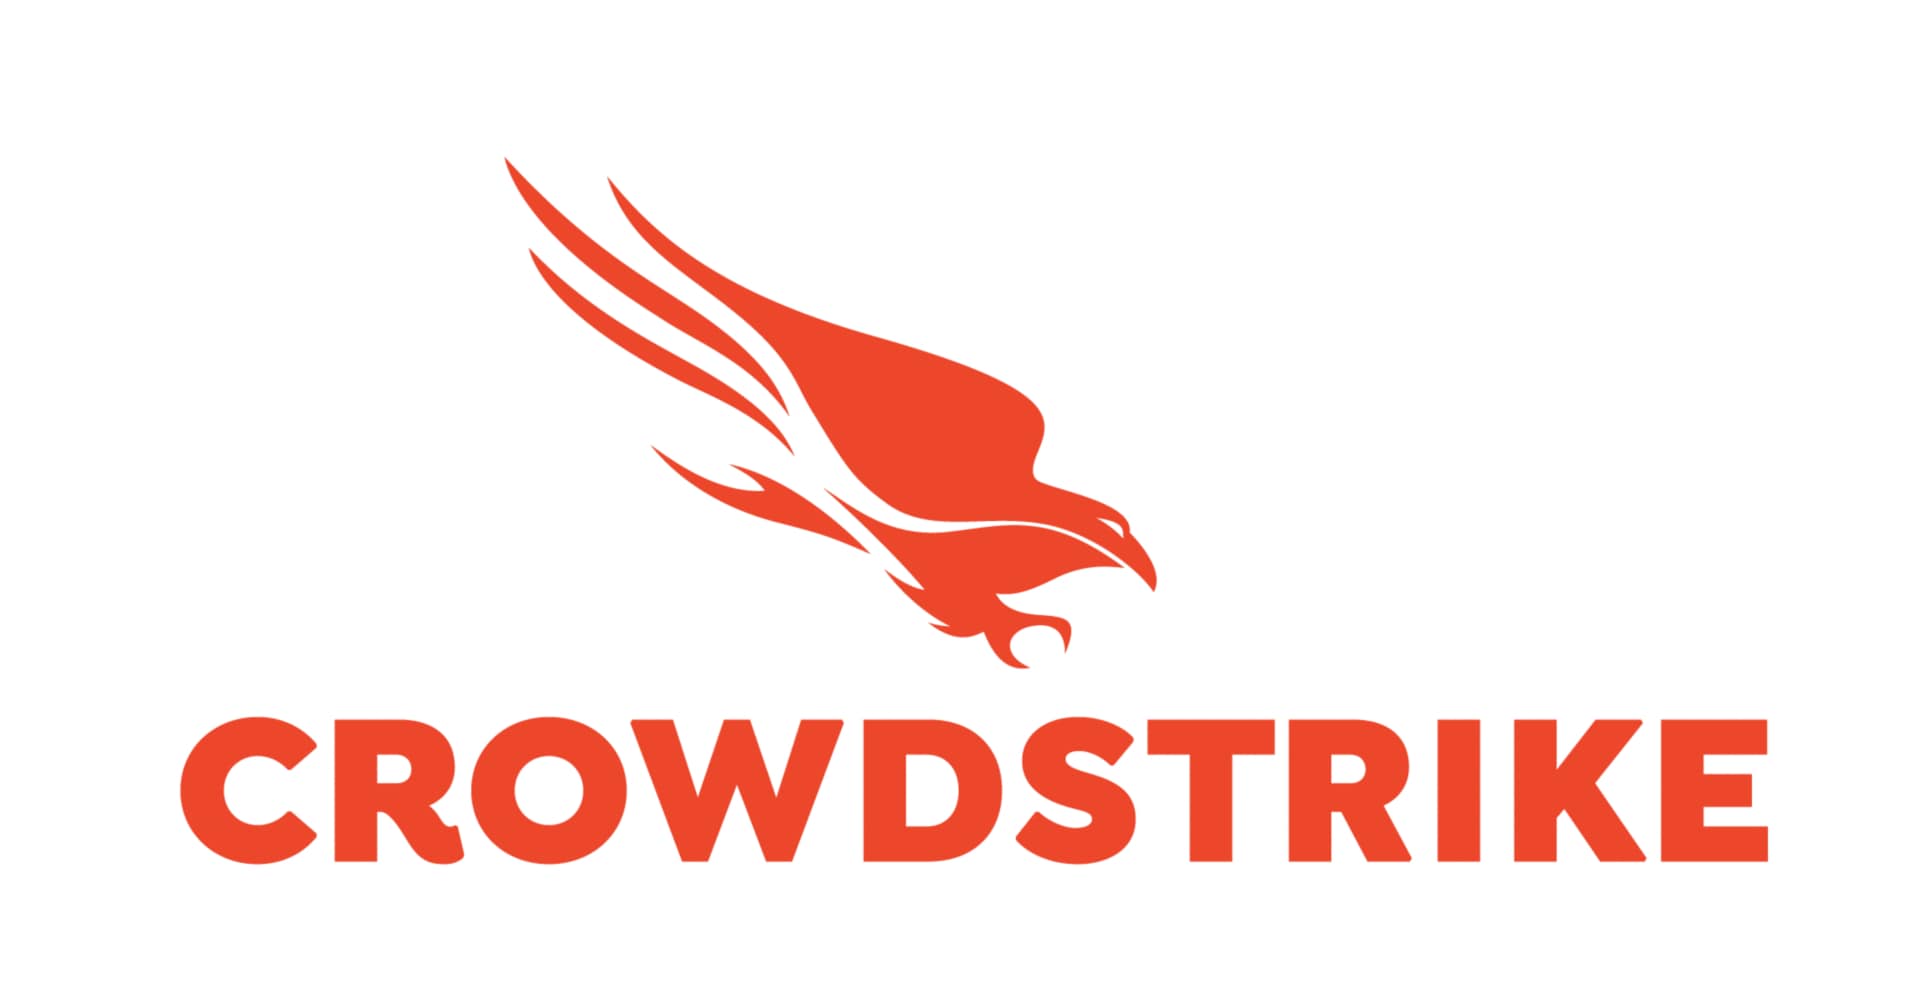 CrowdStrike 1-Month Falcon Intelligence Application Software Subscription (1,000-1,499 Licenses)